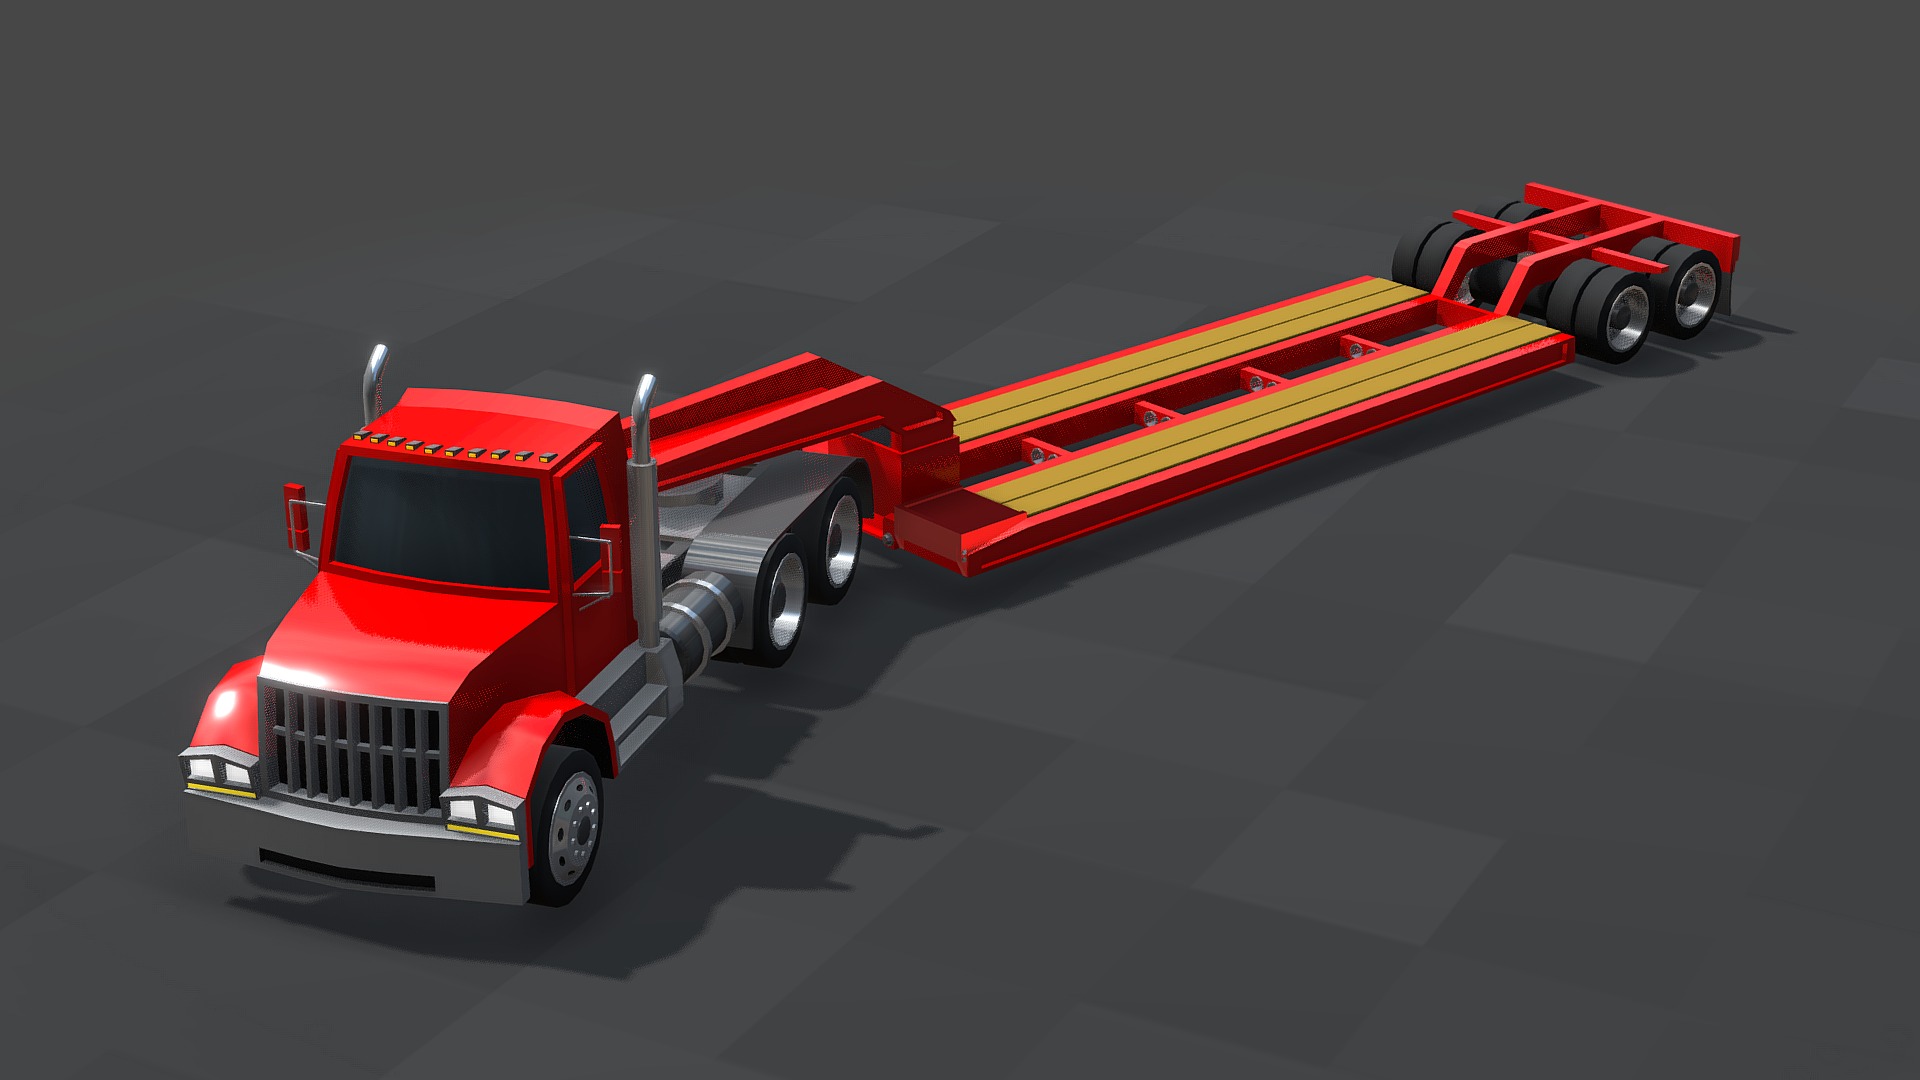 Low Poly Lowboy Truck &amp; Trailer Model Created In 3DS Max 2012.

All Formats Size: 12.7 MB

Zip File Size: 4.40 MB

Available Formats: .MAX 2012 Default” .MAX 2012 Vray” .3DS” .FBX” .OBJ+.MTL” .DWG .STL”

(Polys Count: 18712) (Verts count: 19135) - Low Poly Lowboy Trailer & Truck - Buy Royalty Free 3D model by SHUBBAK3D 3d model